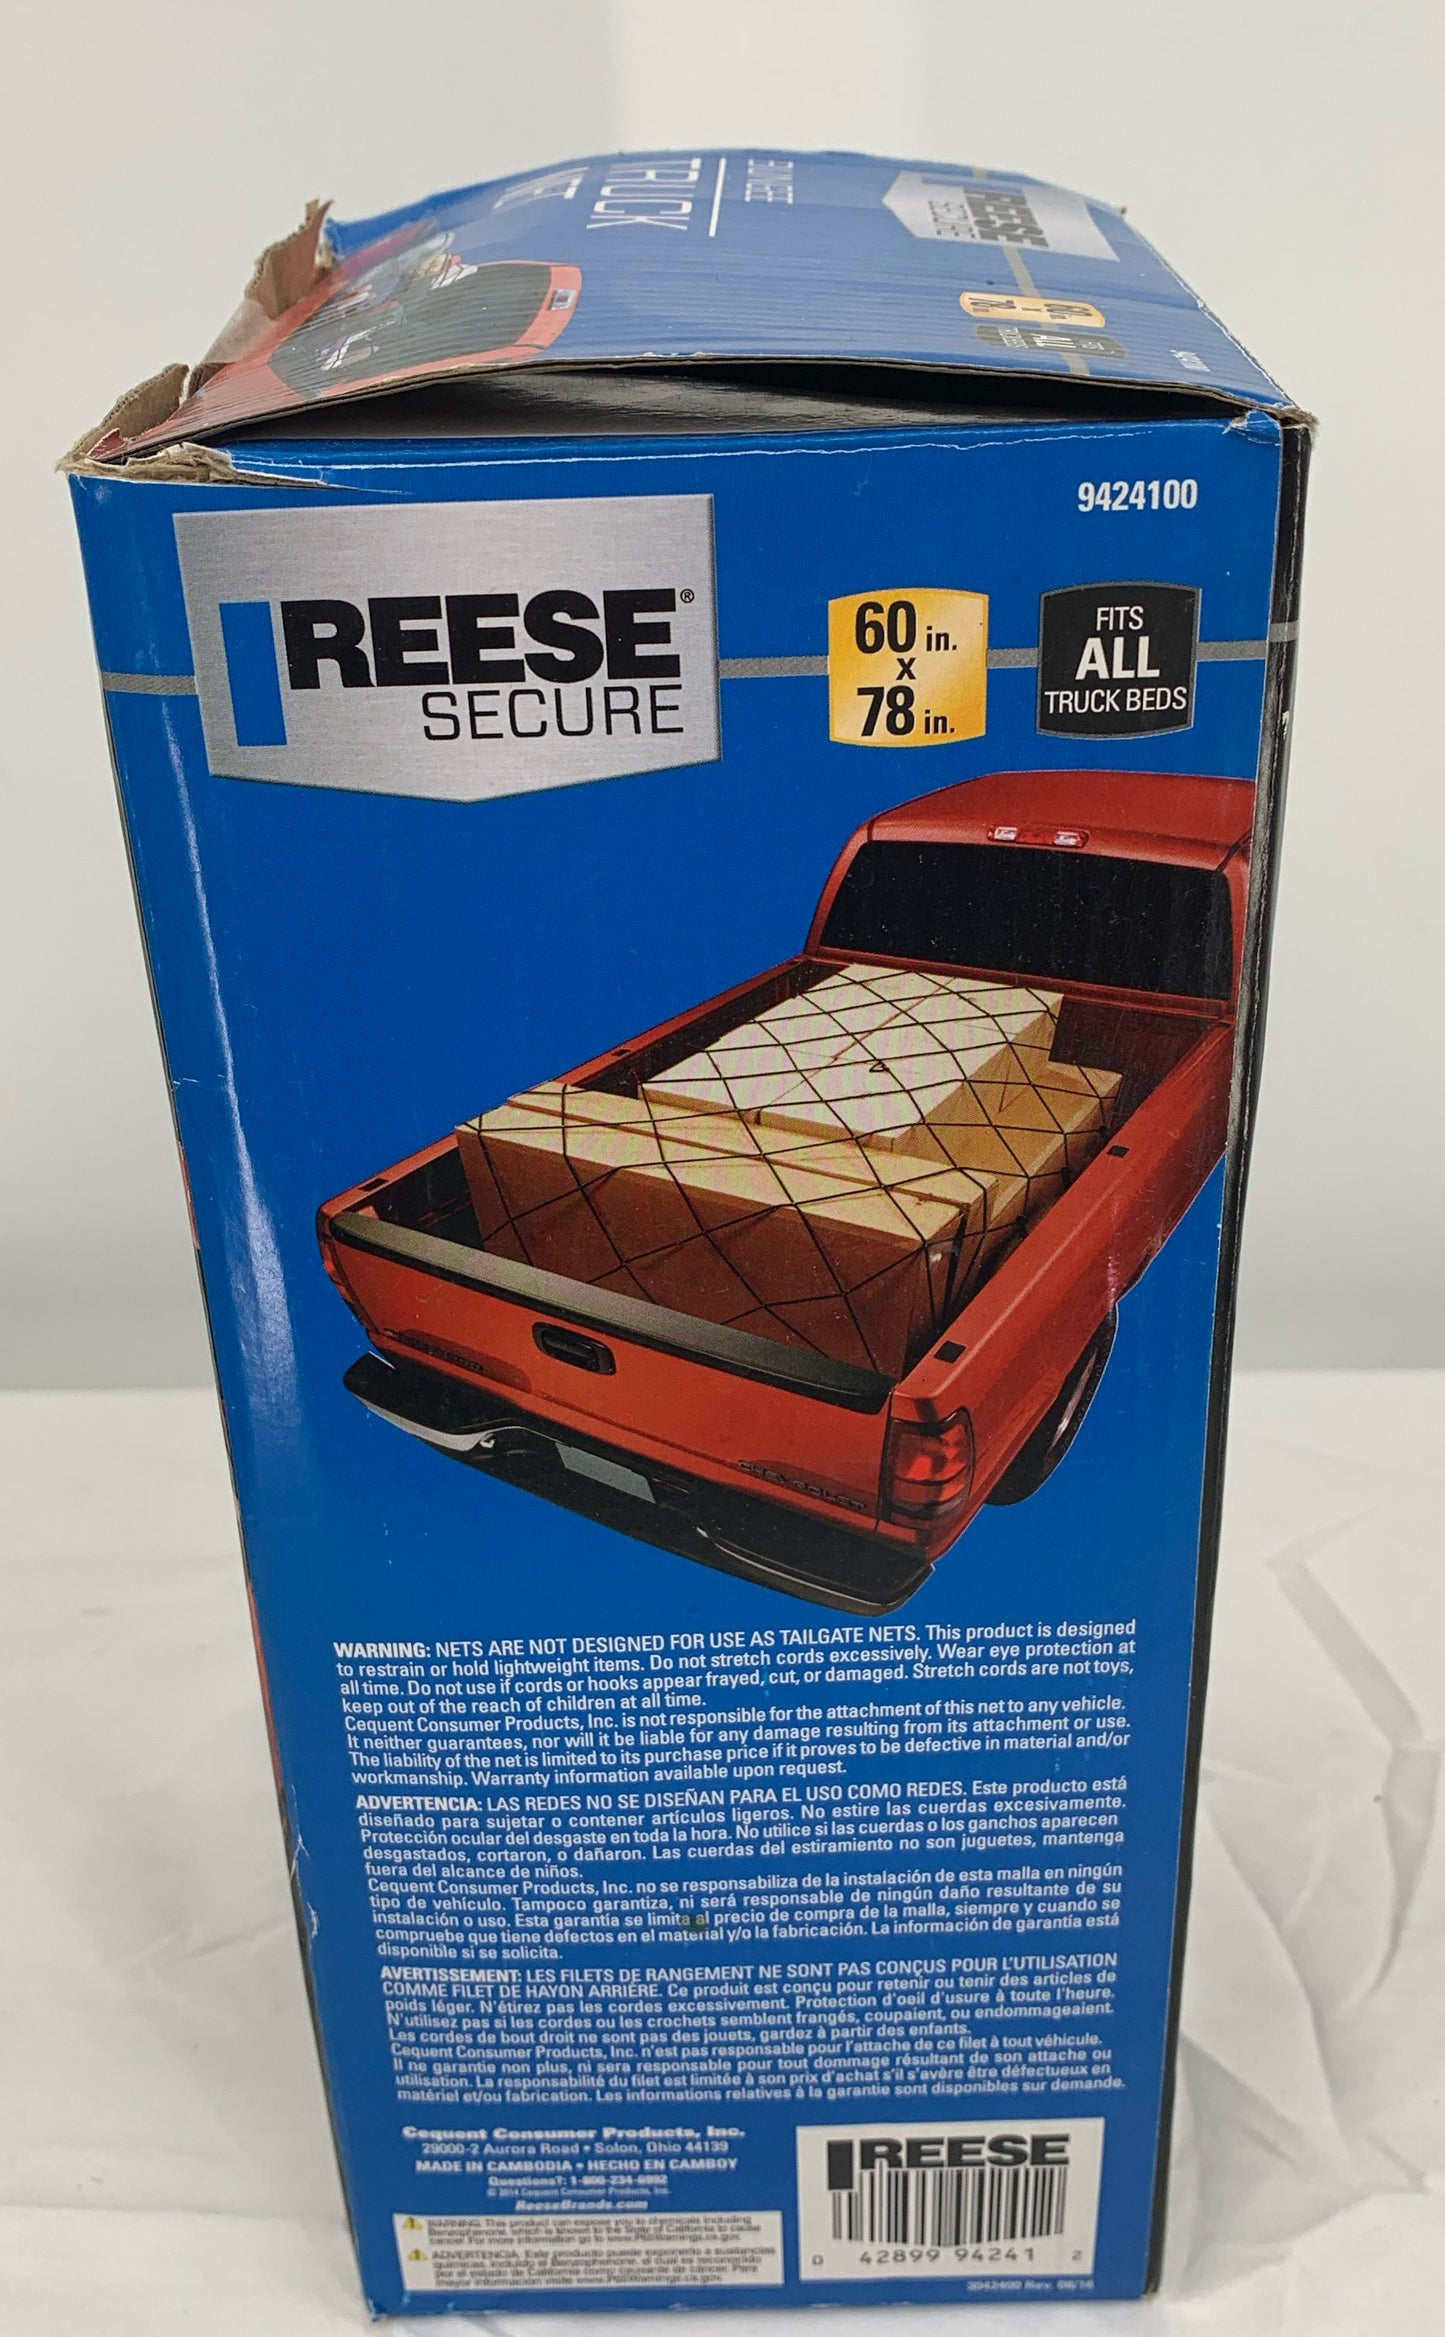 Reese Secure Bungee Truck Net 60"x78" Fits All Truck Beds-UV & Weather Resistant